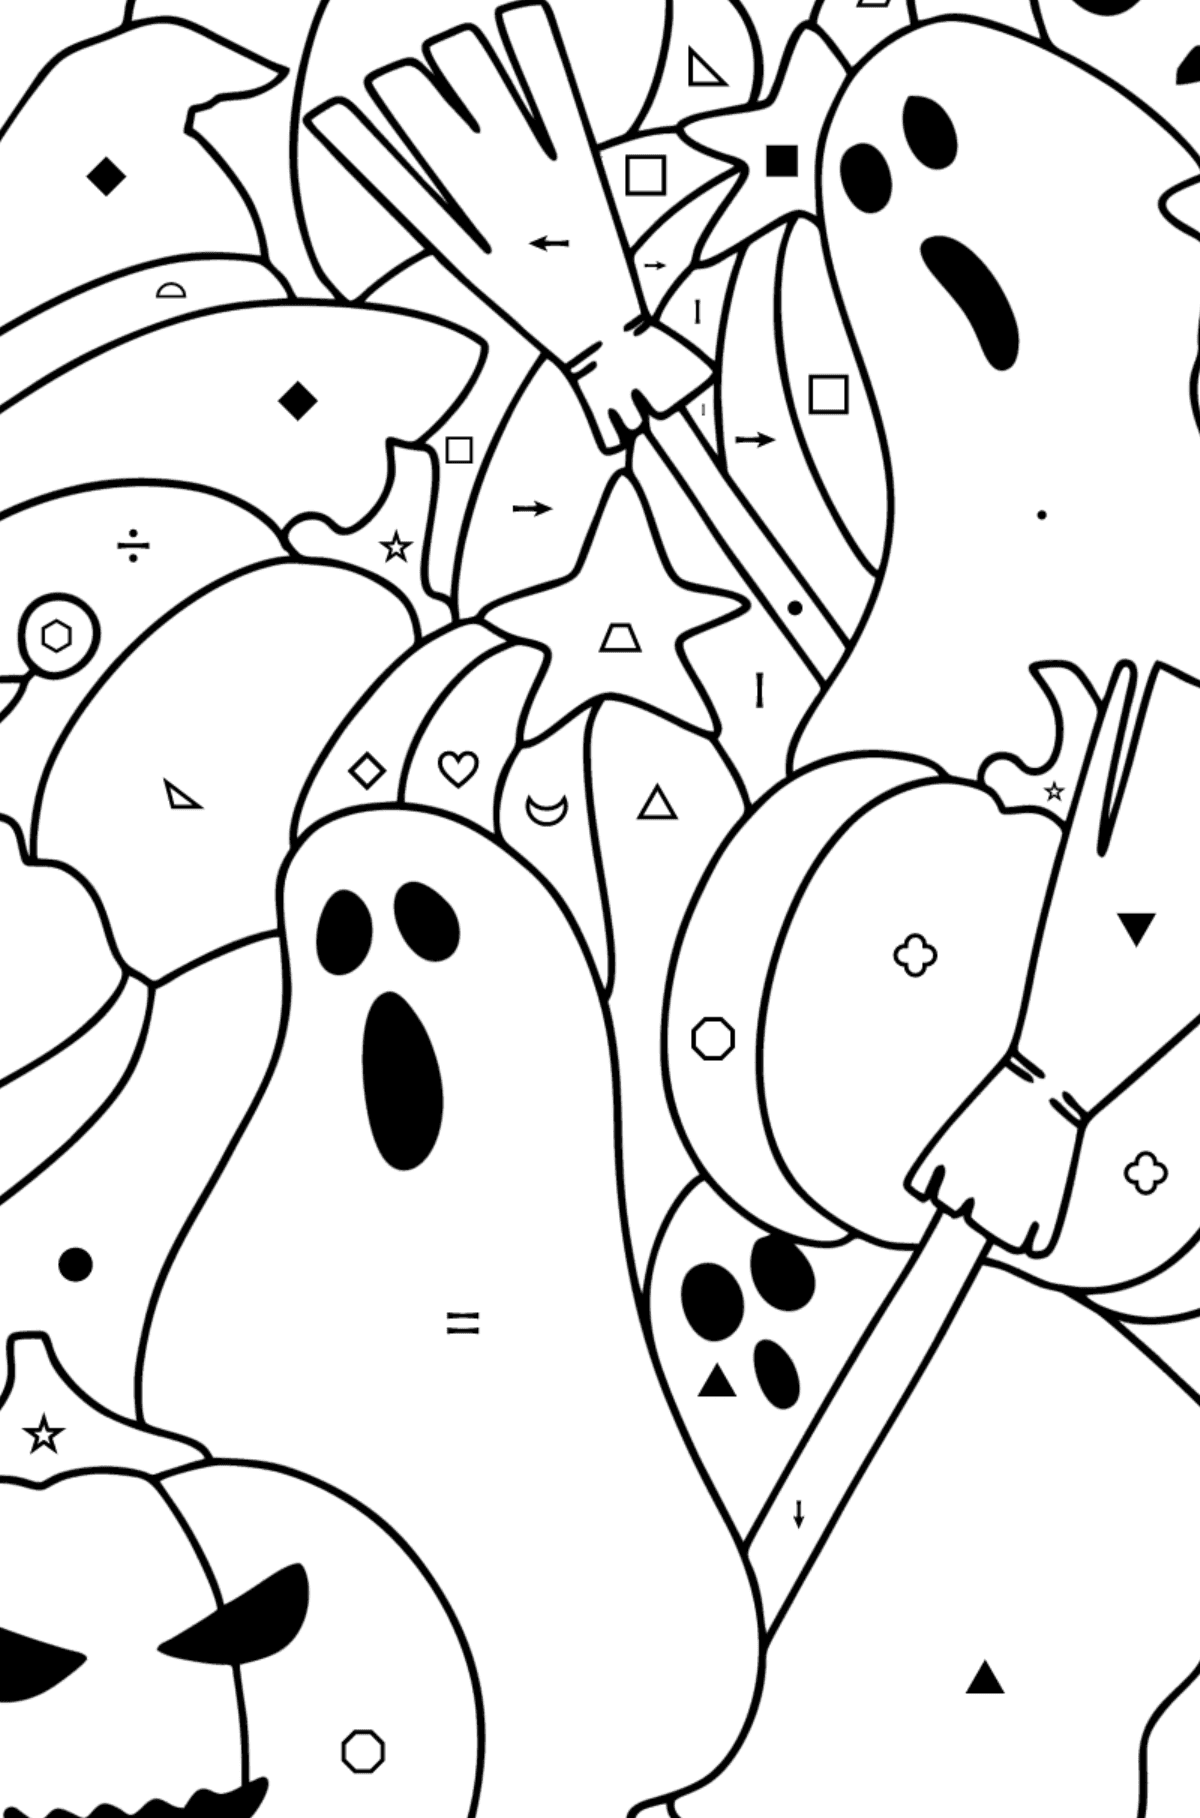 Doodle Сoloring page for Kids - Halloween - Coloring by Symbols and Geometric Shapes for Kids